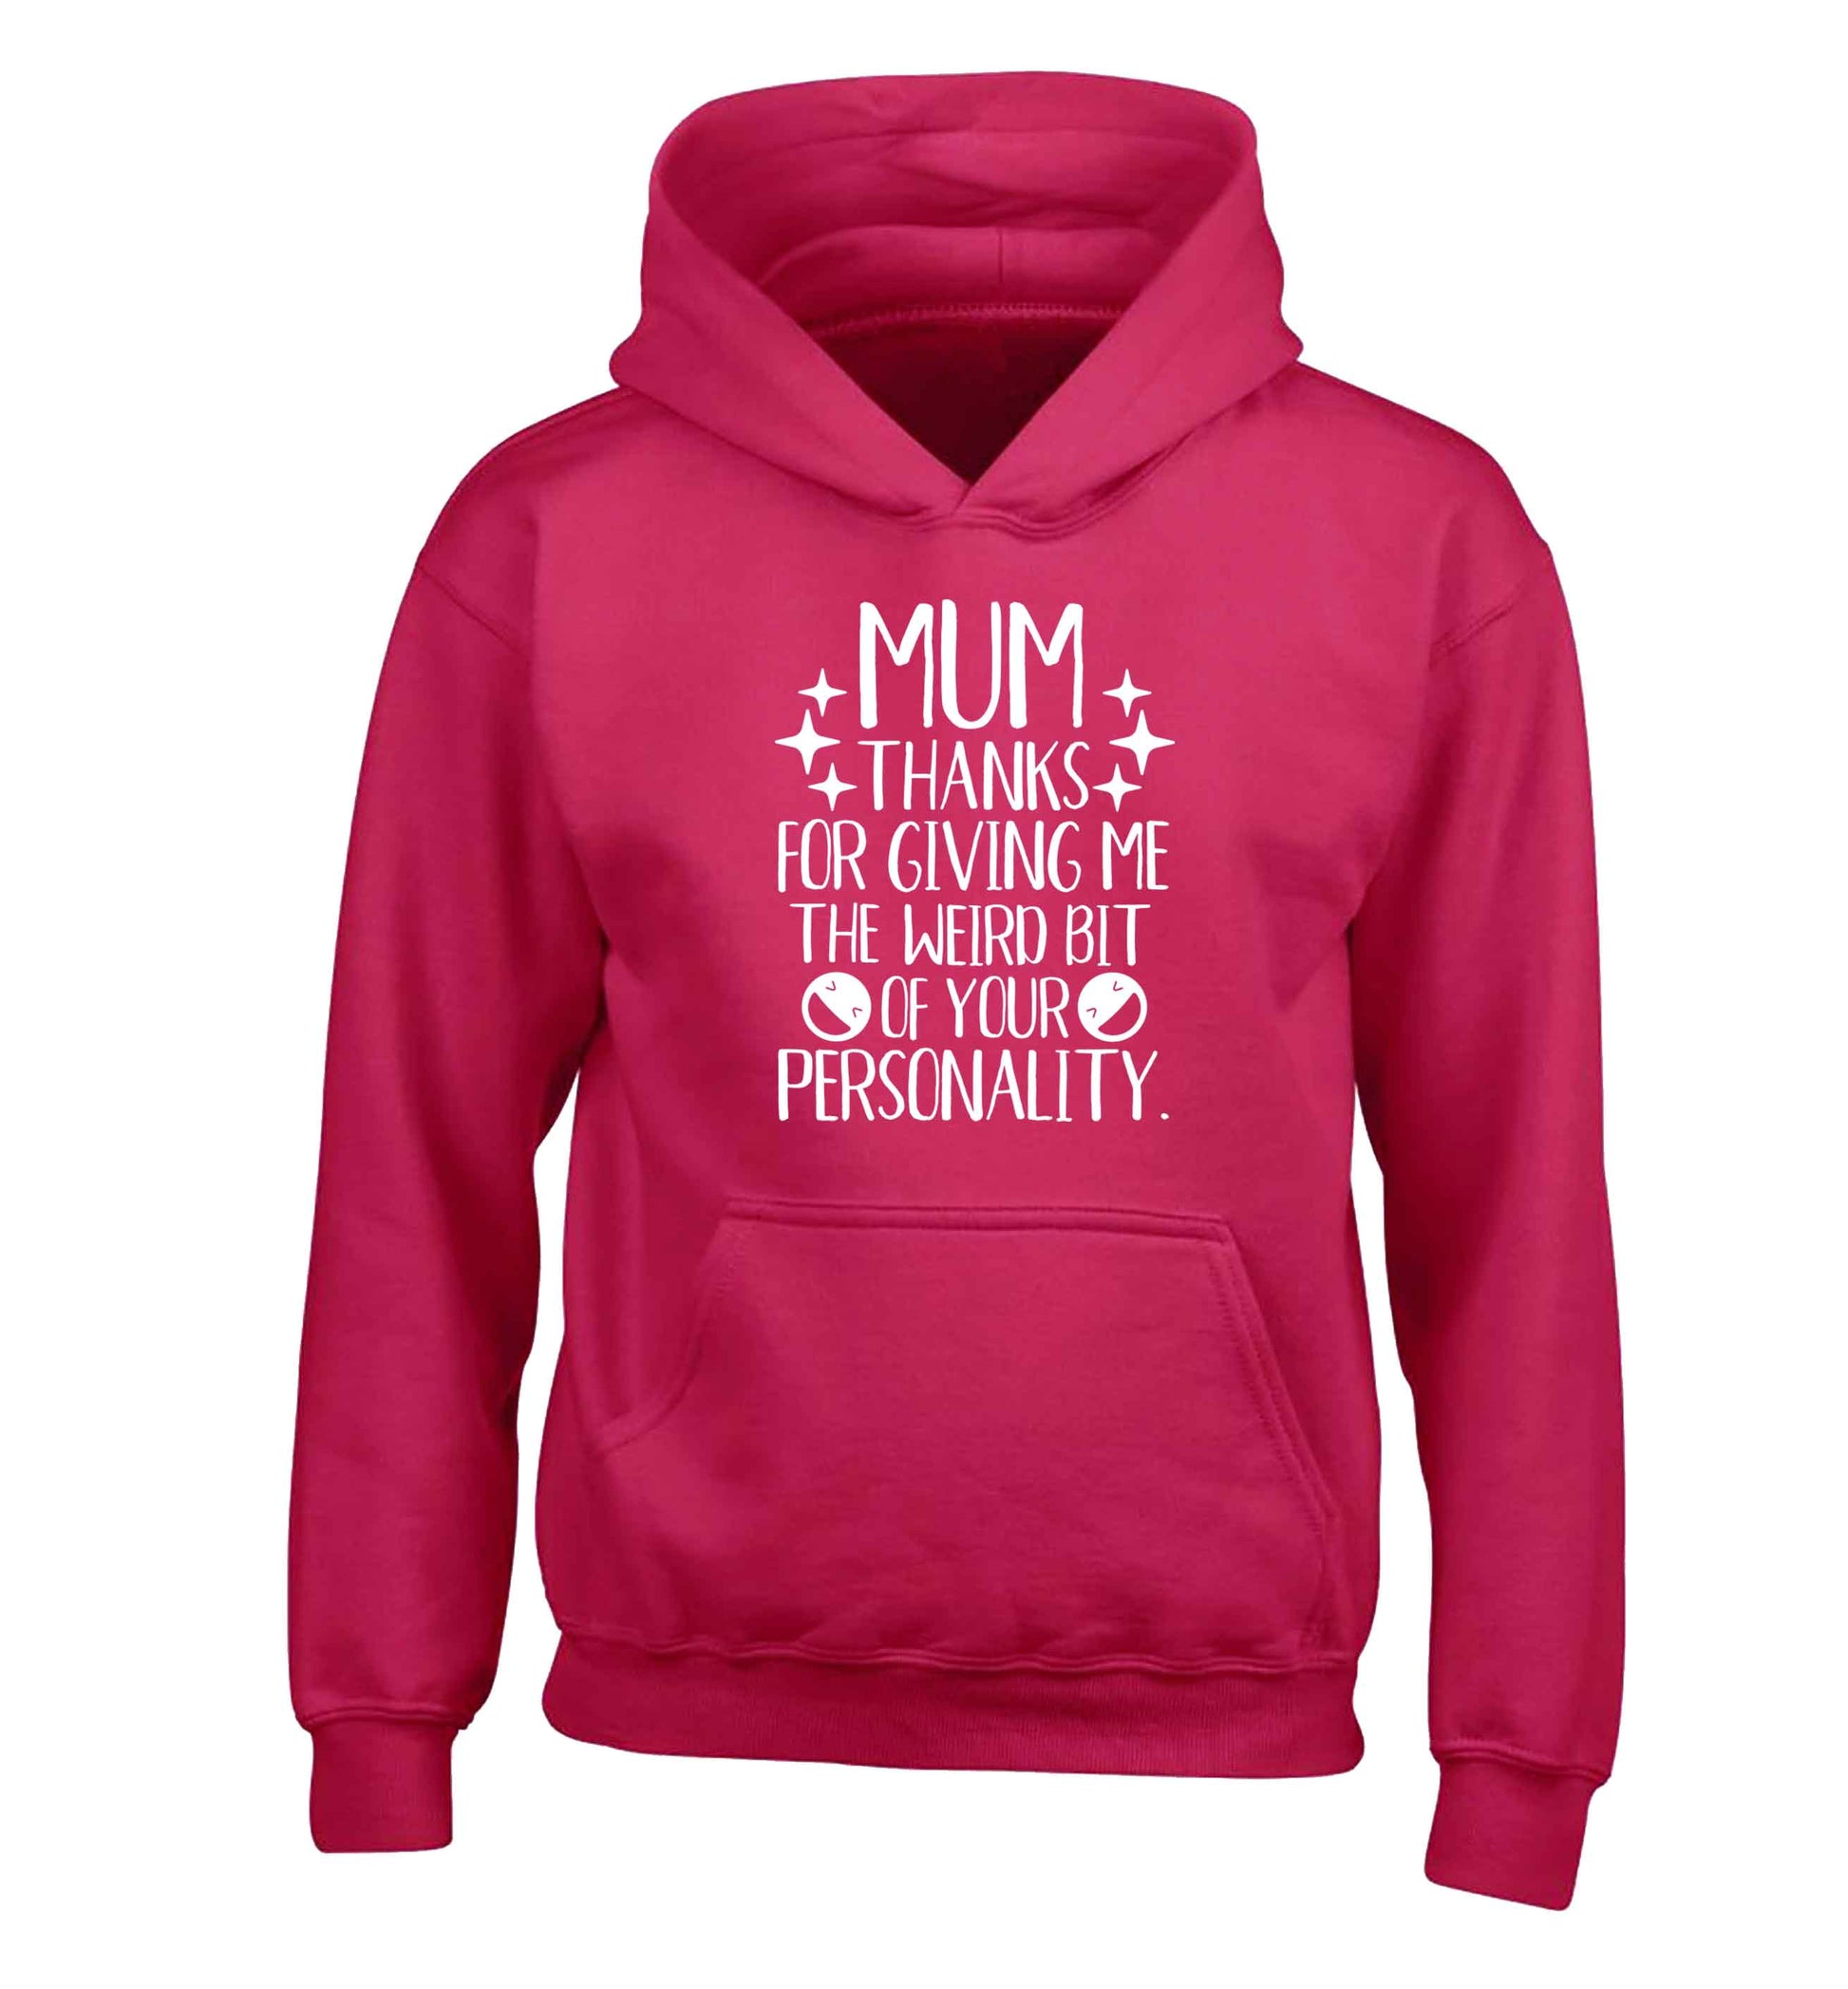 Mum, I love you more than halloumi and if you know me at all you know how deep that is children's pink hoodie 12-13 Years